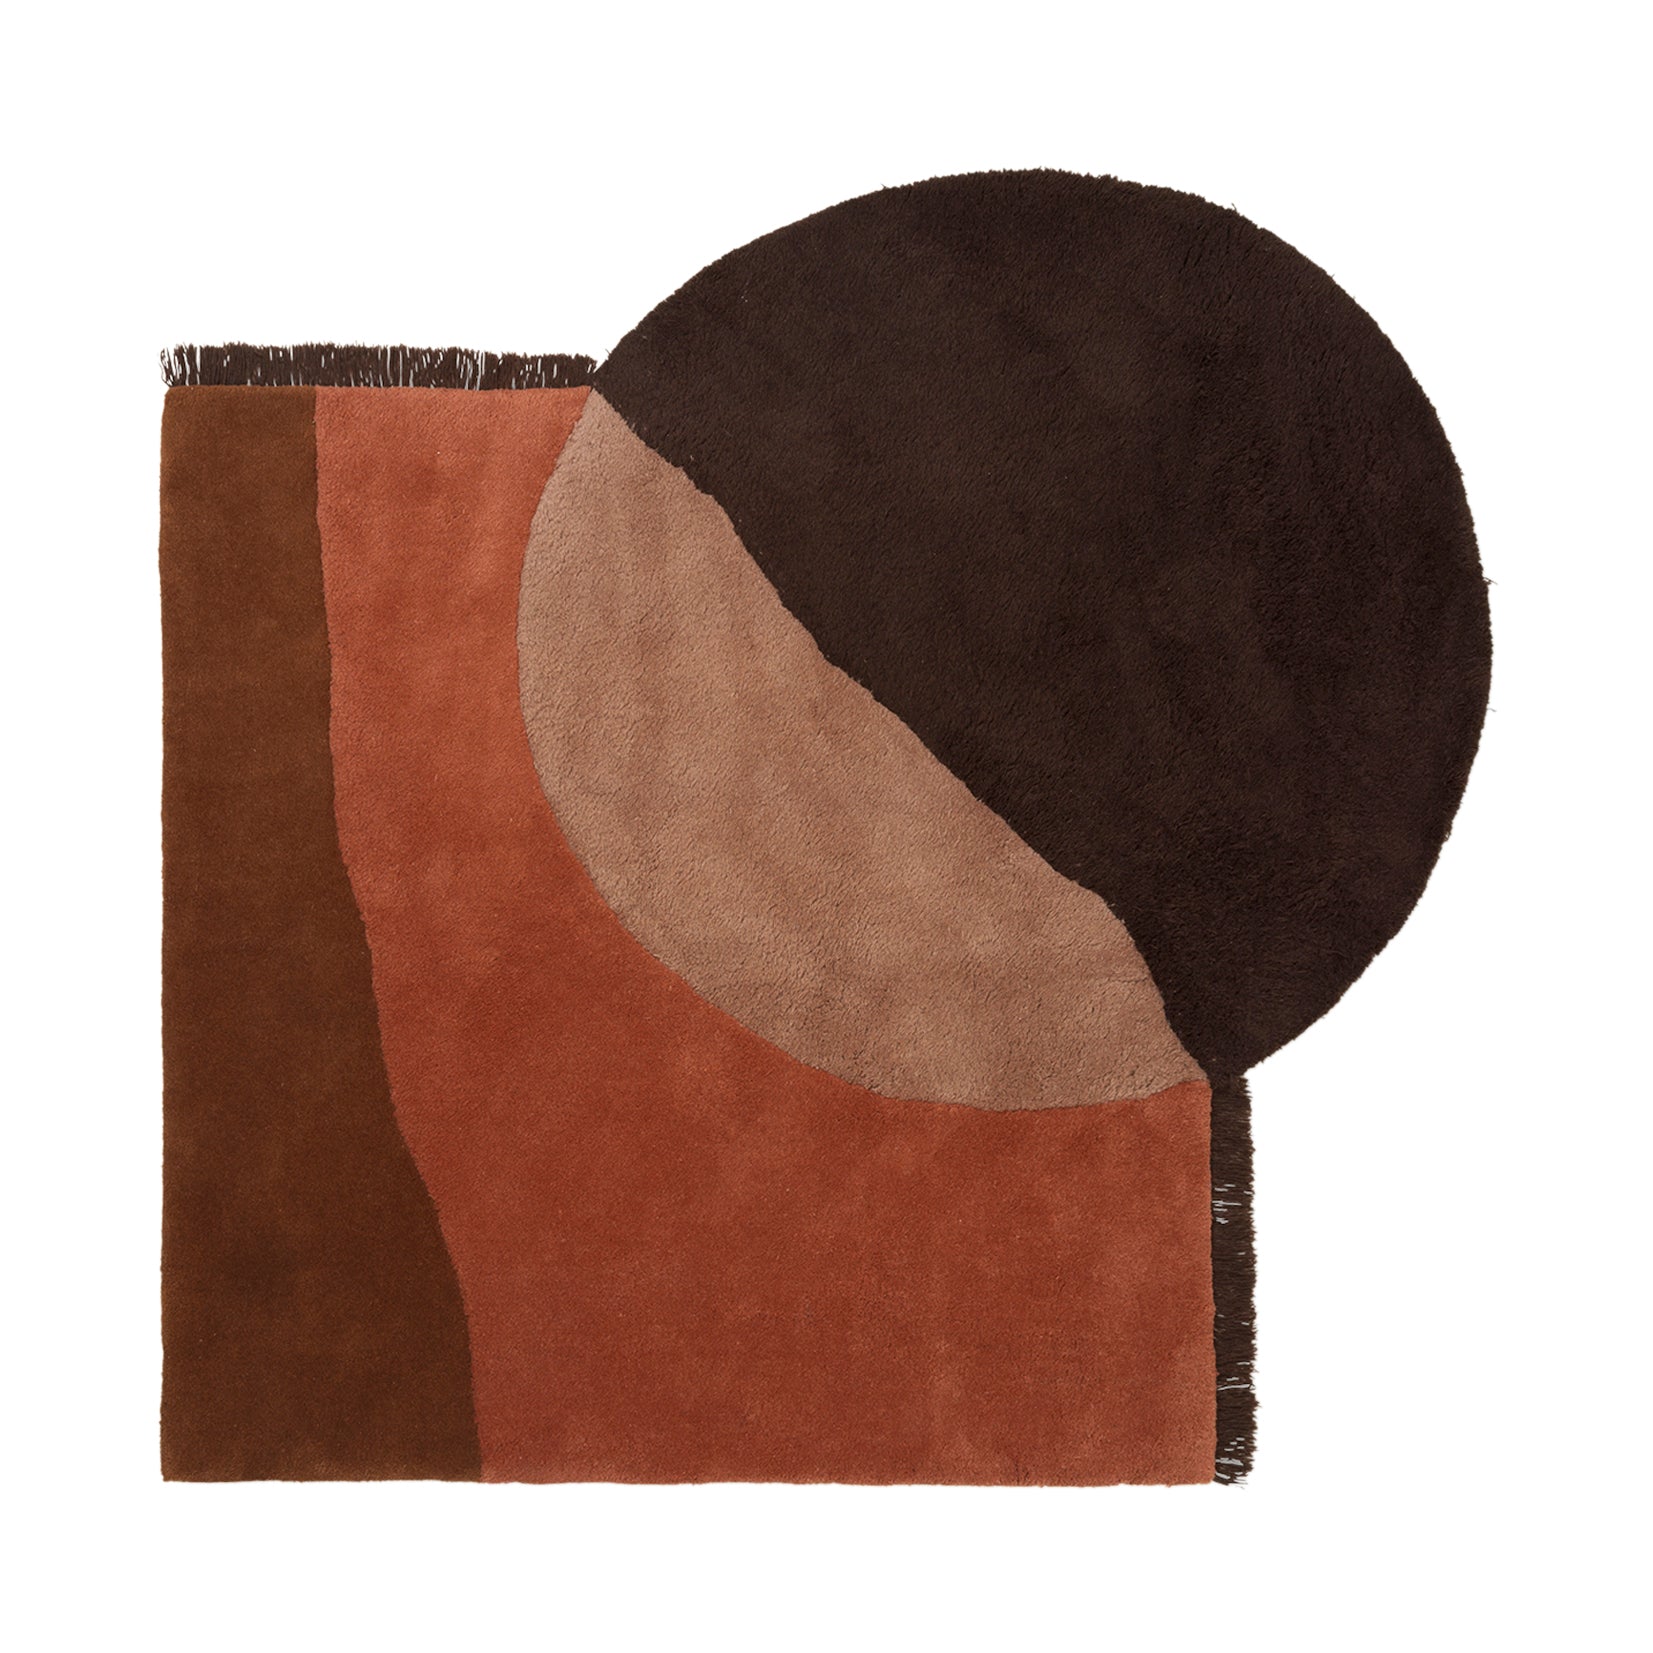 View Tufted Rug: Red Brown